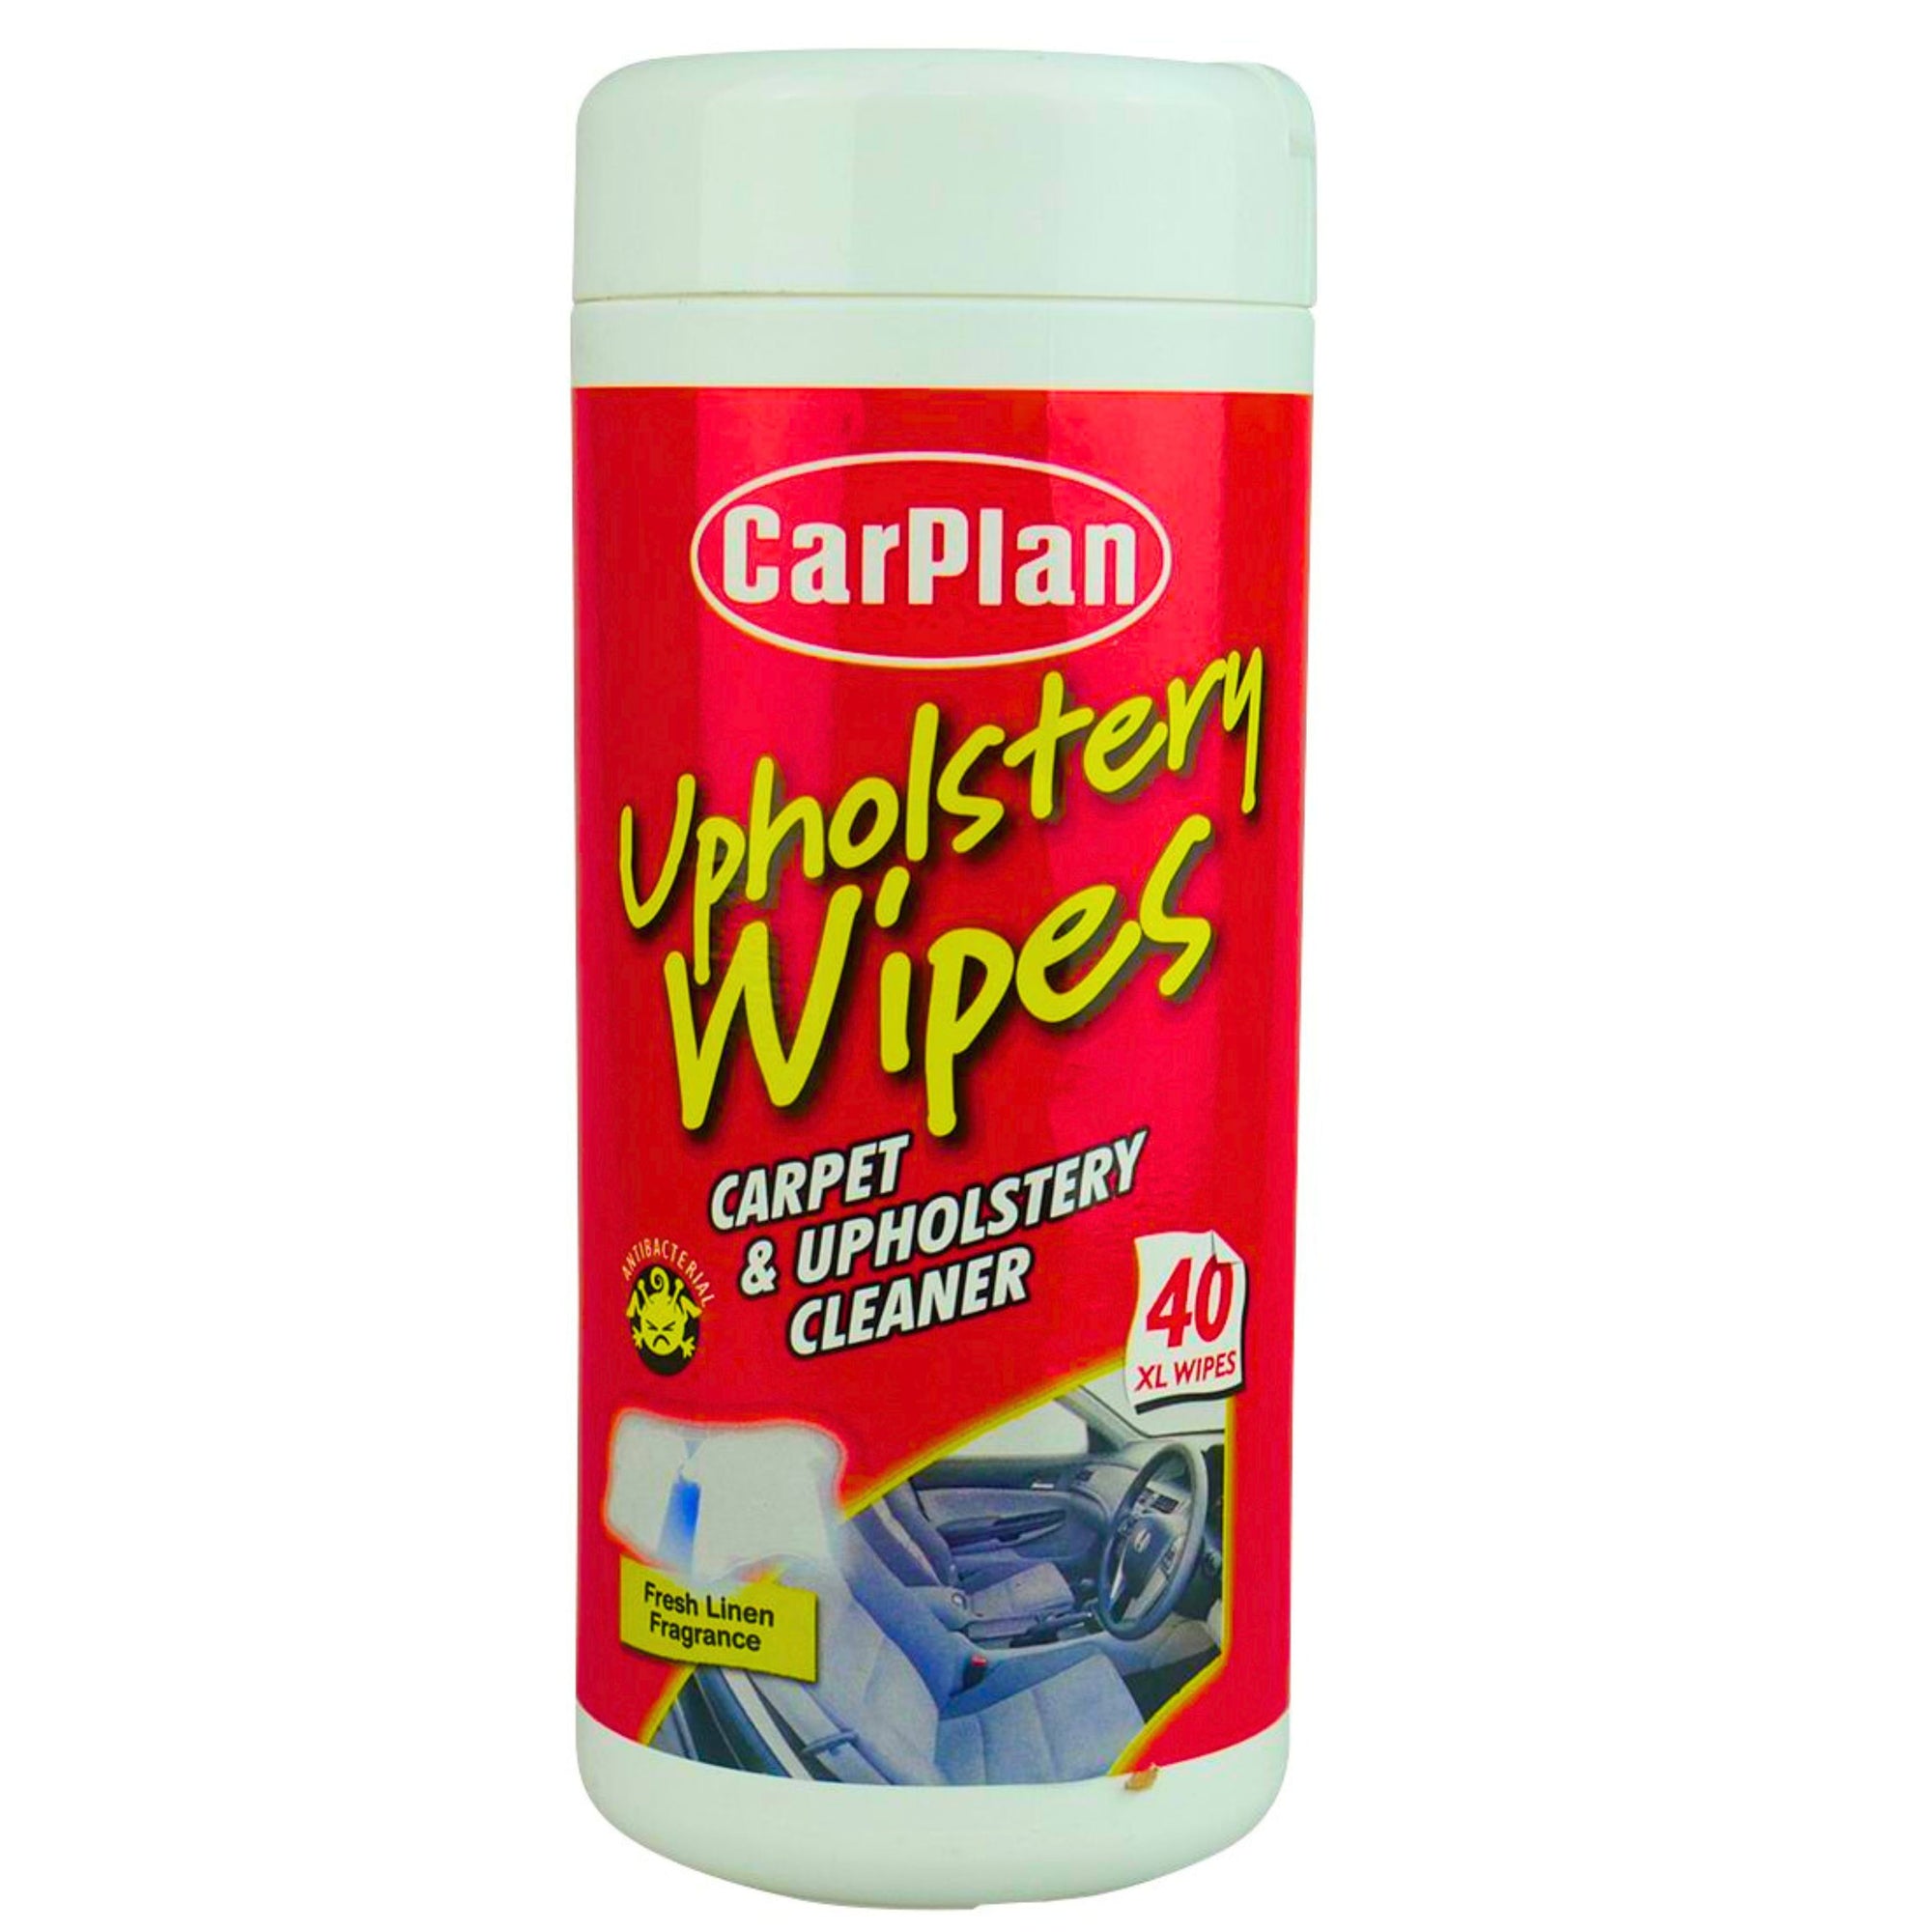 CARPET & UPHOLSTERY WIPES ANTI-BACTERIAL | TUB OF 40 WIPES - South East Clearance Centre